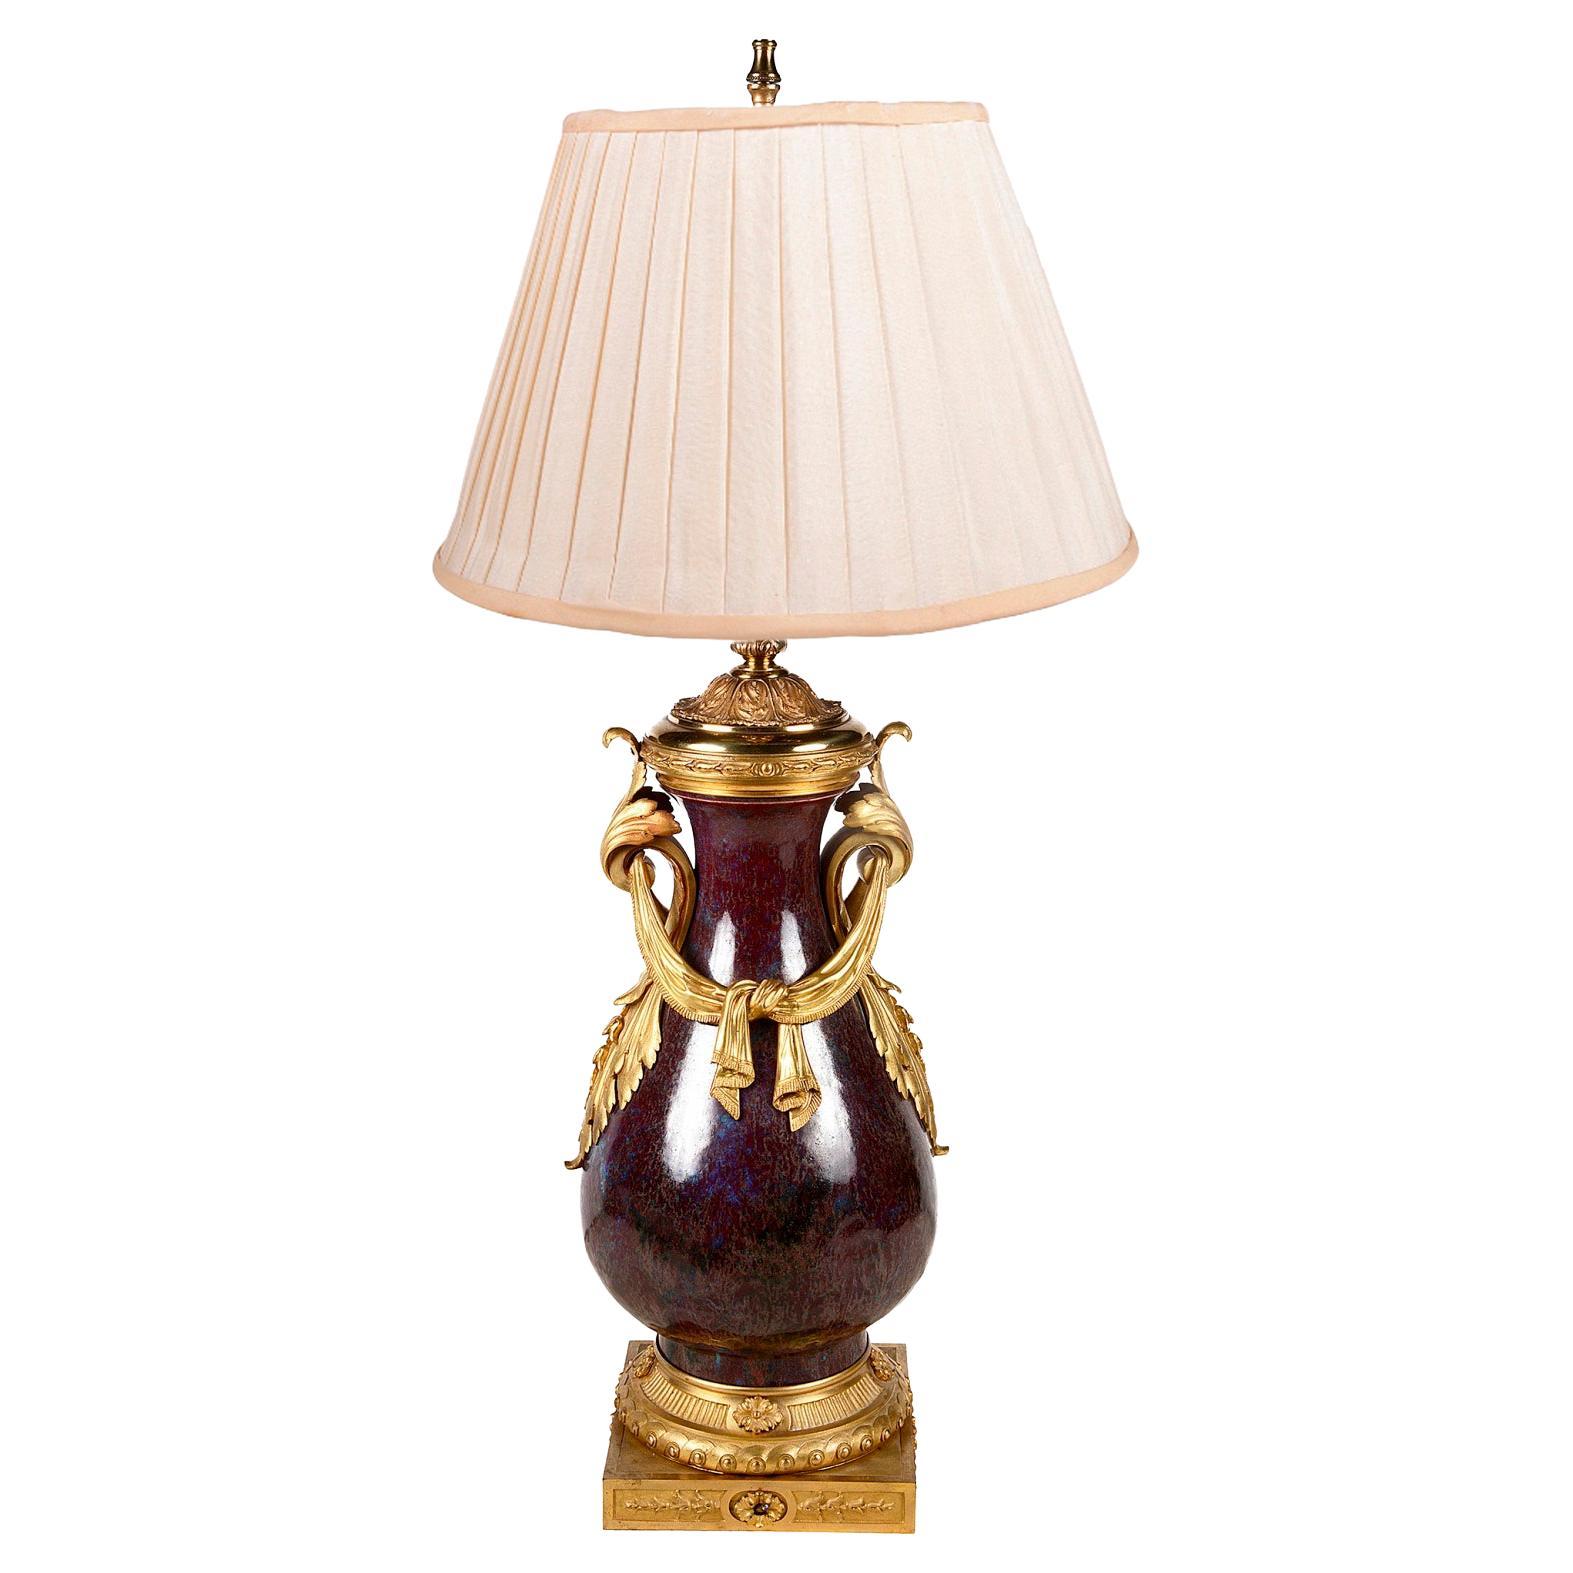 Antique Gold & Brass Deco Pleated Polyester Fringed Fabric Table Lamp Shade 779G 